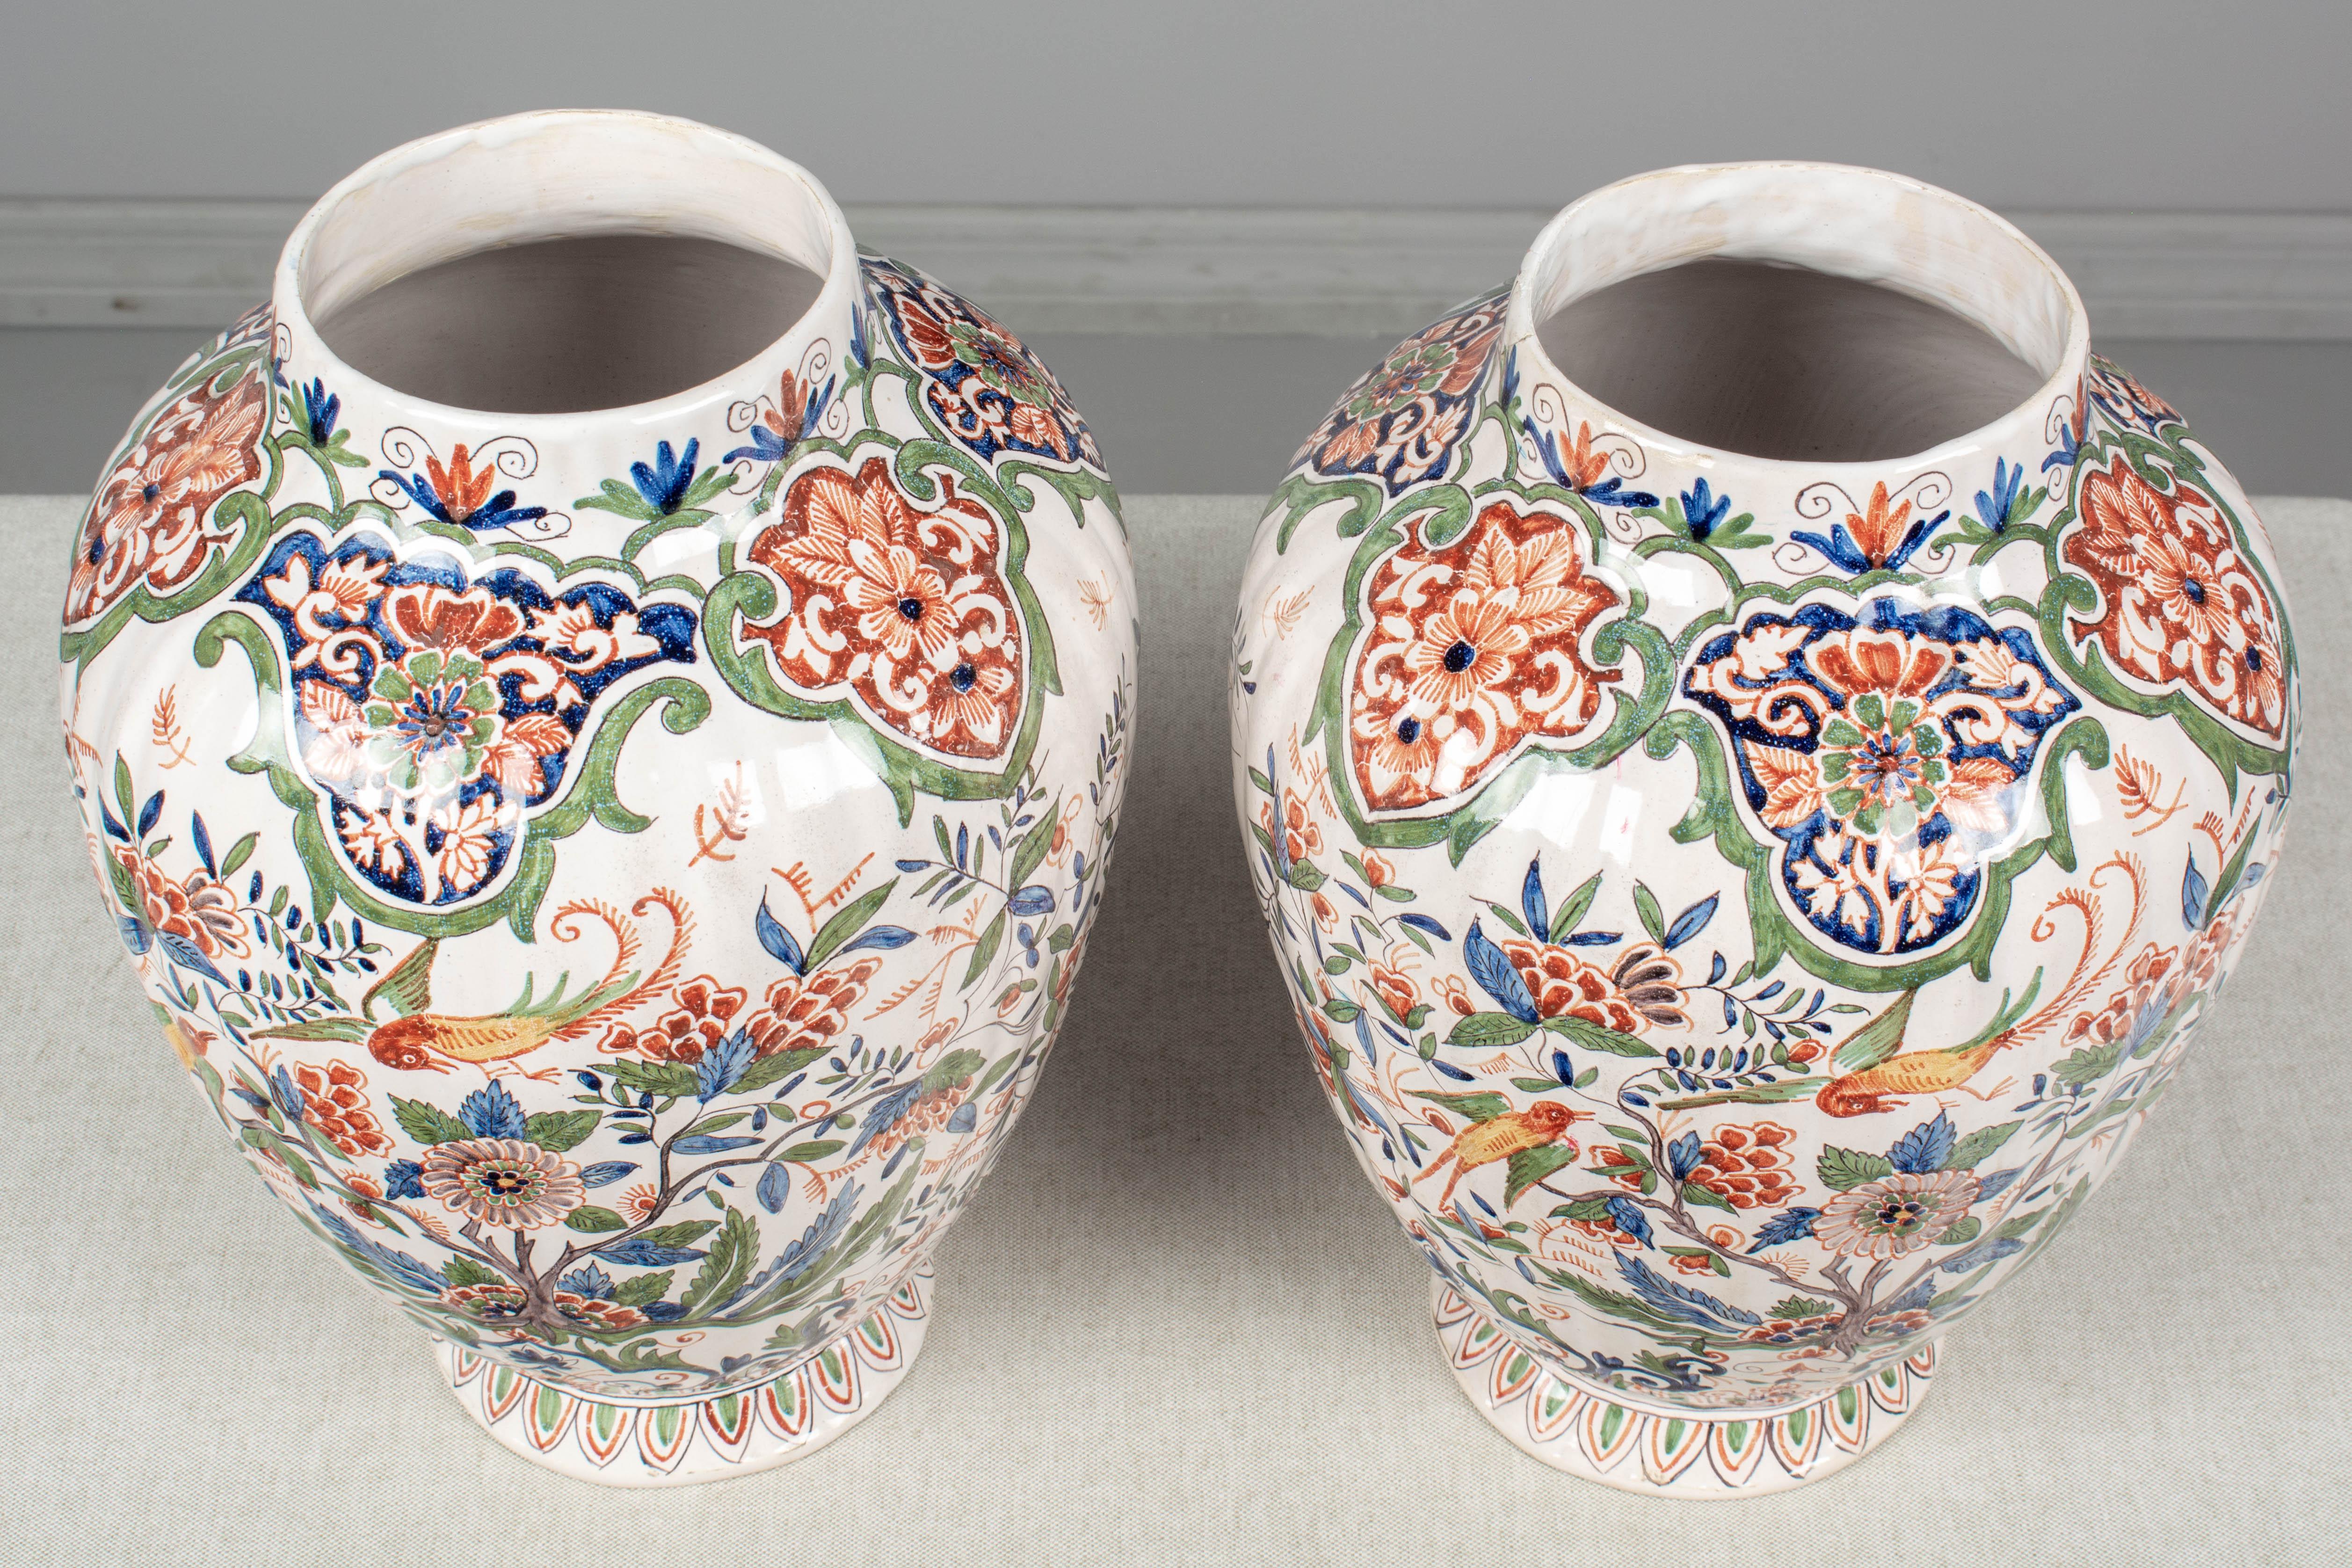 Pair of 19th Century Delft Faience Ginger Jars 2